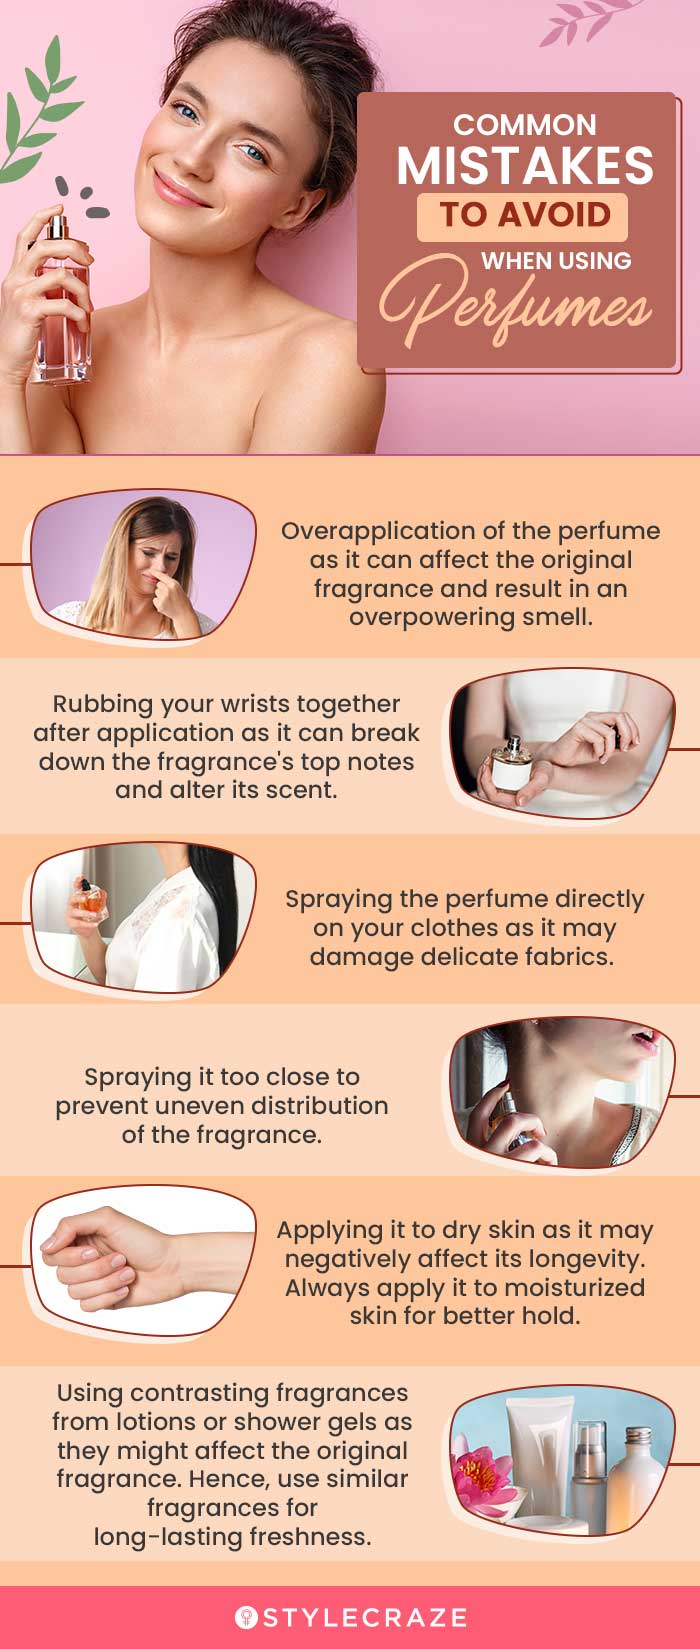 Common Mistakes To Avoid When Using Perfumes (infographic)